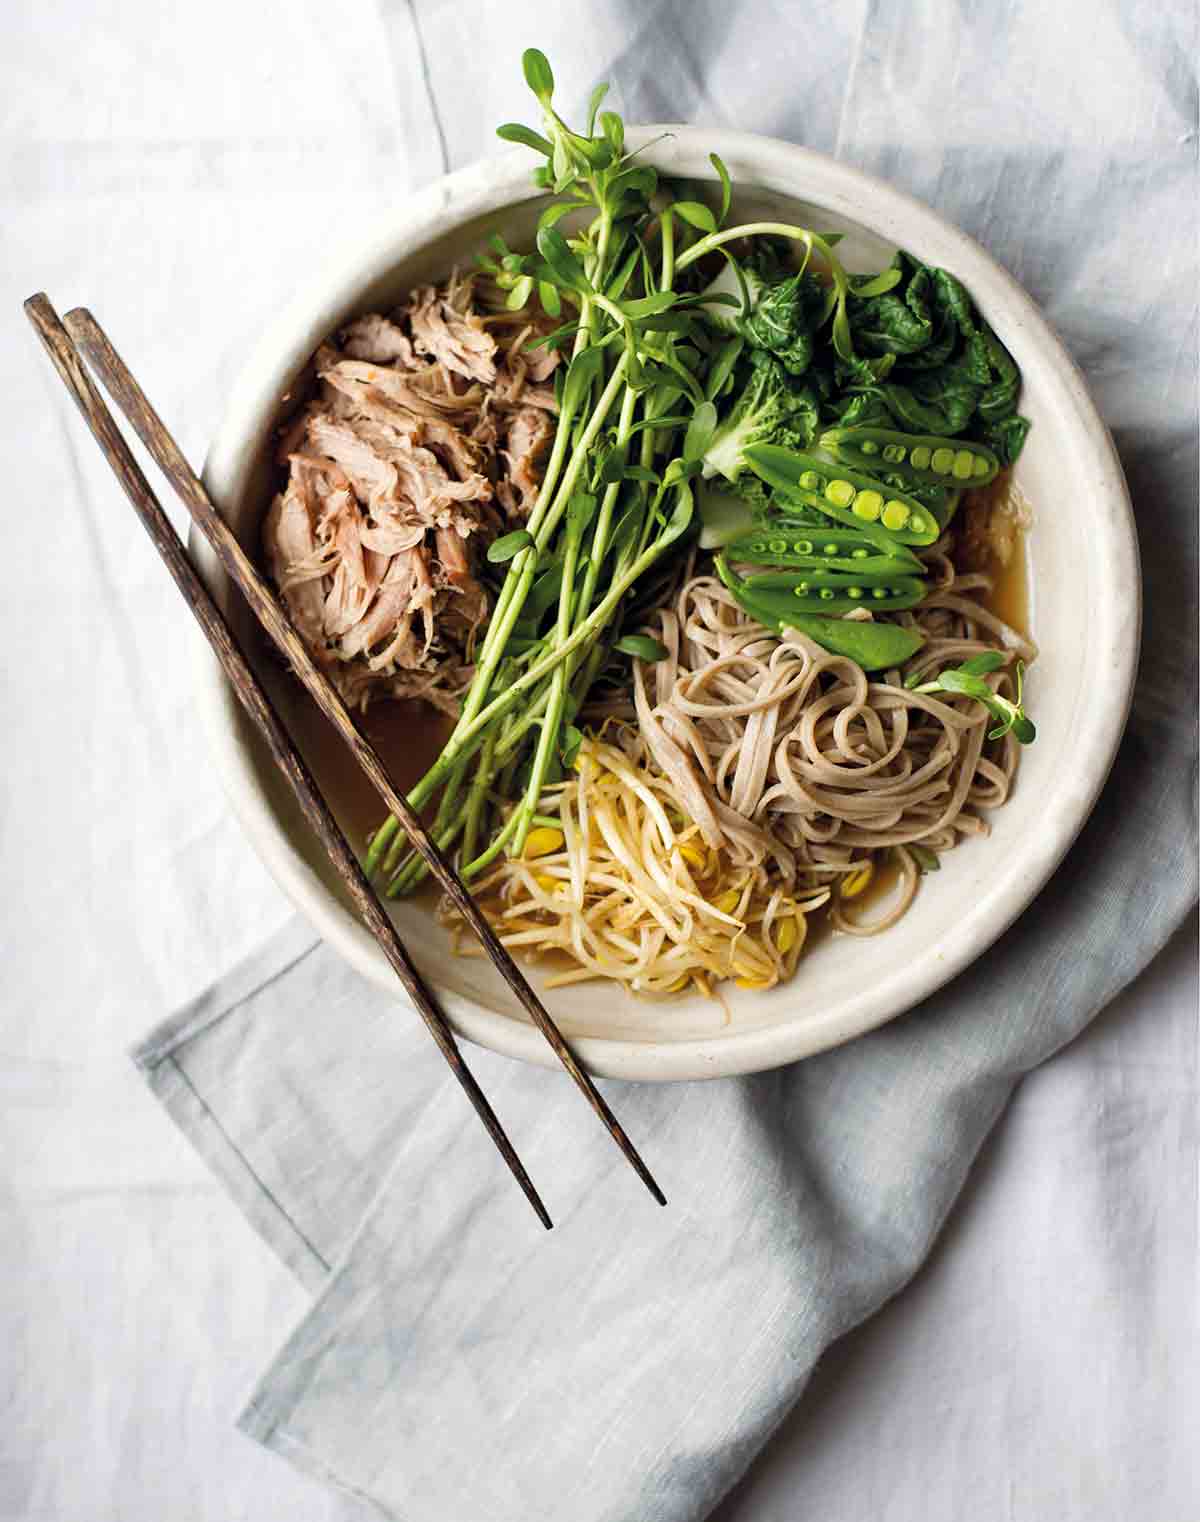 A bowl of chashu pork ramen, filled with braised pork, soba noodles, bean sprouts, peas, and bok choy, with a pair of chopsticks resting on top.